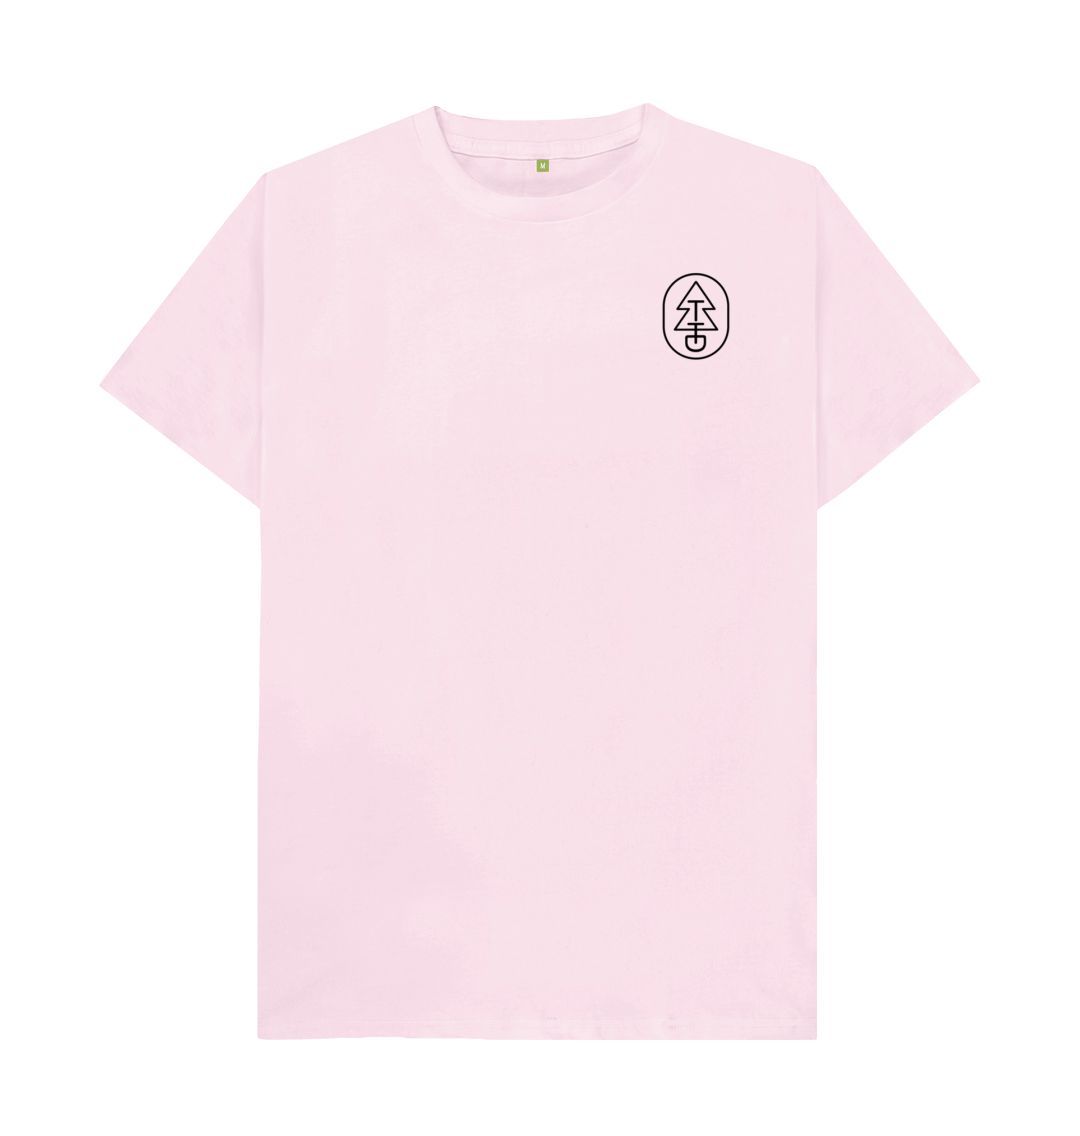 Pink Tree Tee - Channel Sunset